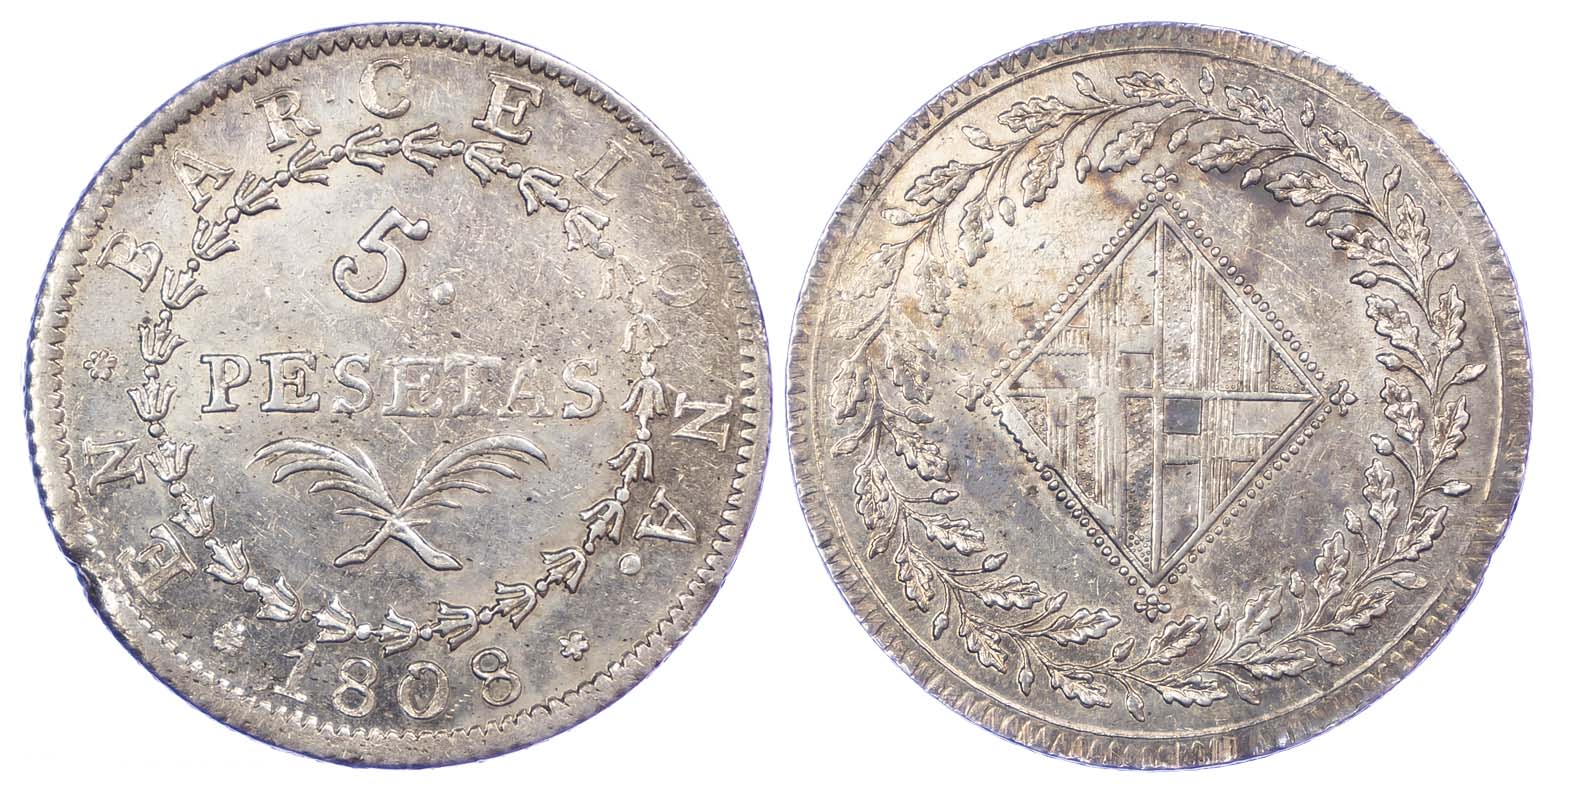 Spain, Barcelona under French occupation, silver 5 Pesetas